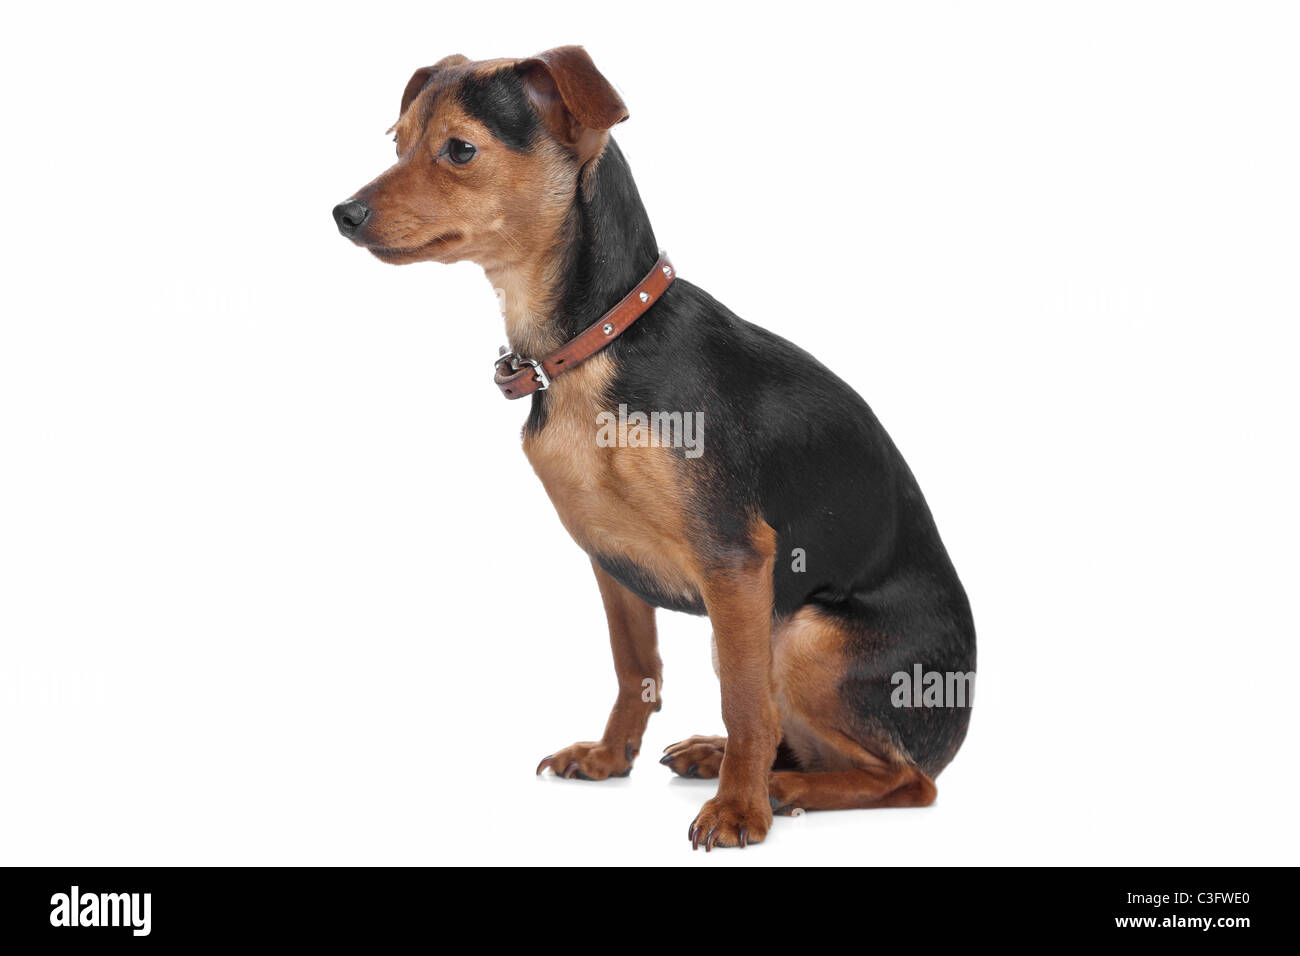 Miniature Pincher in front of a white background Stock Photo